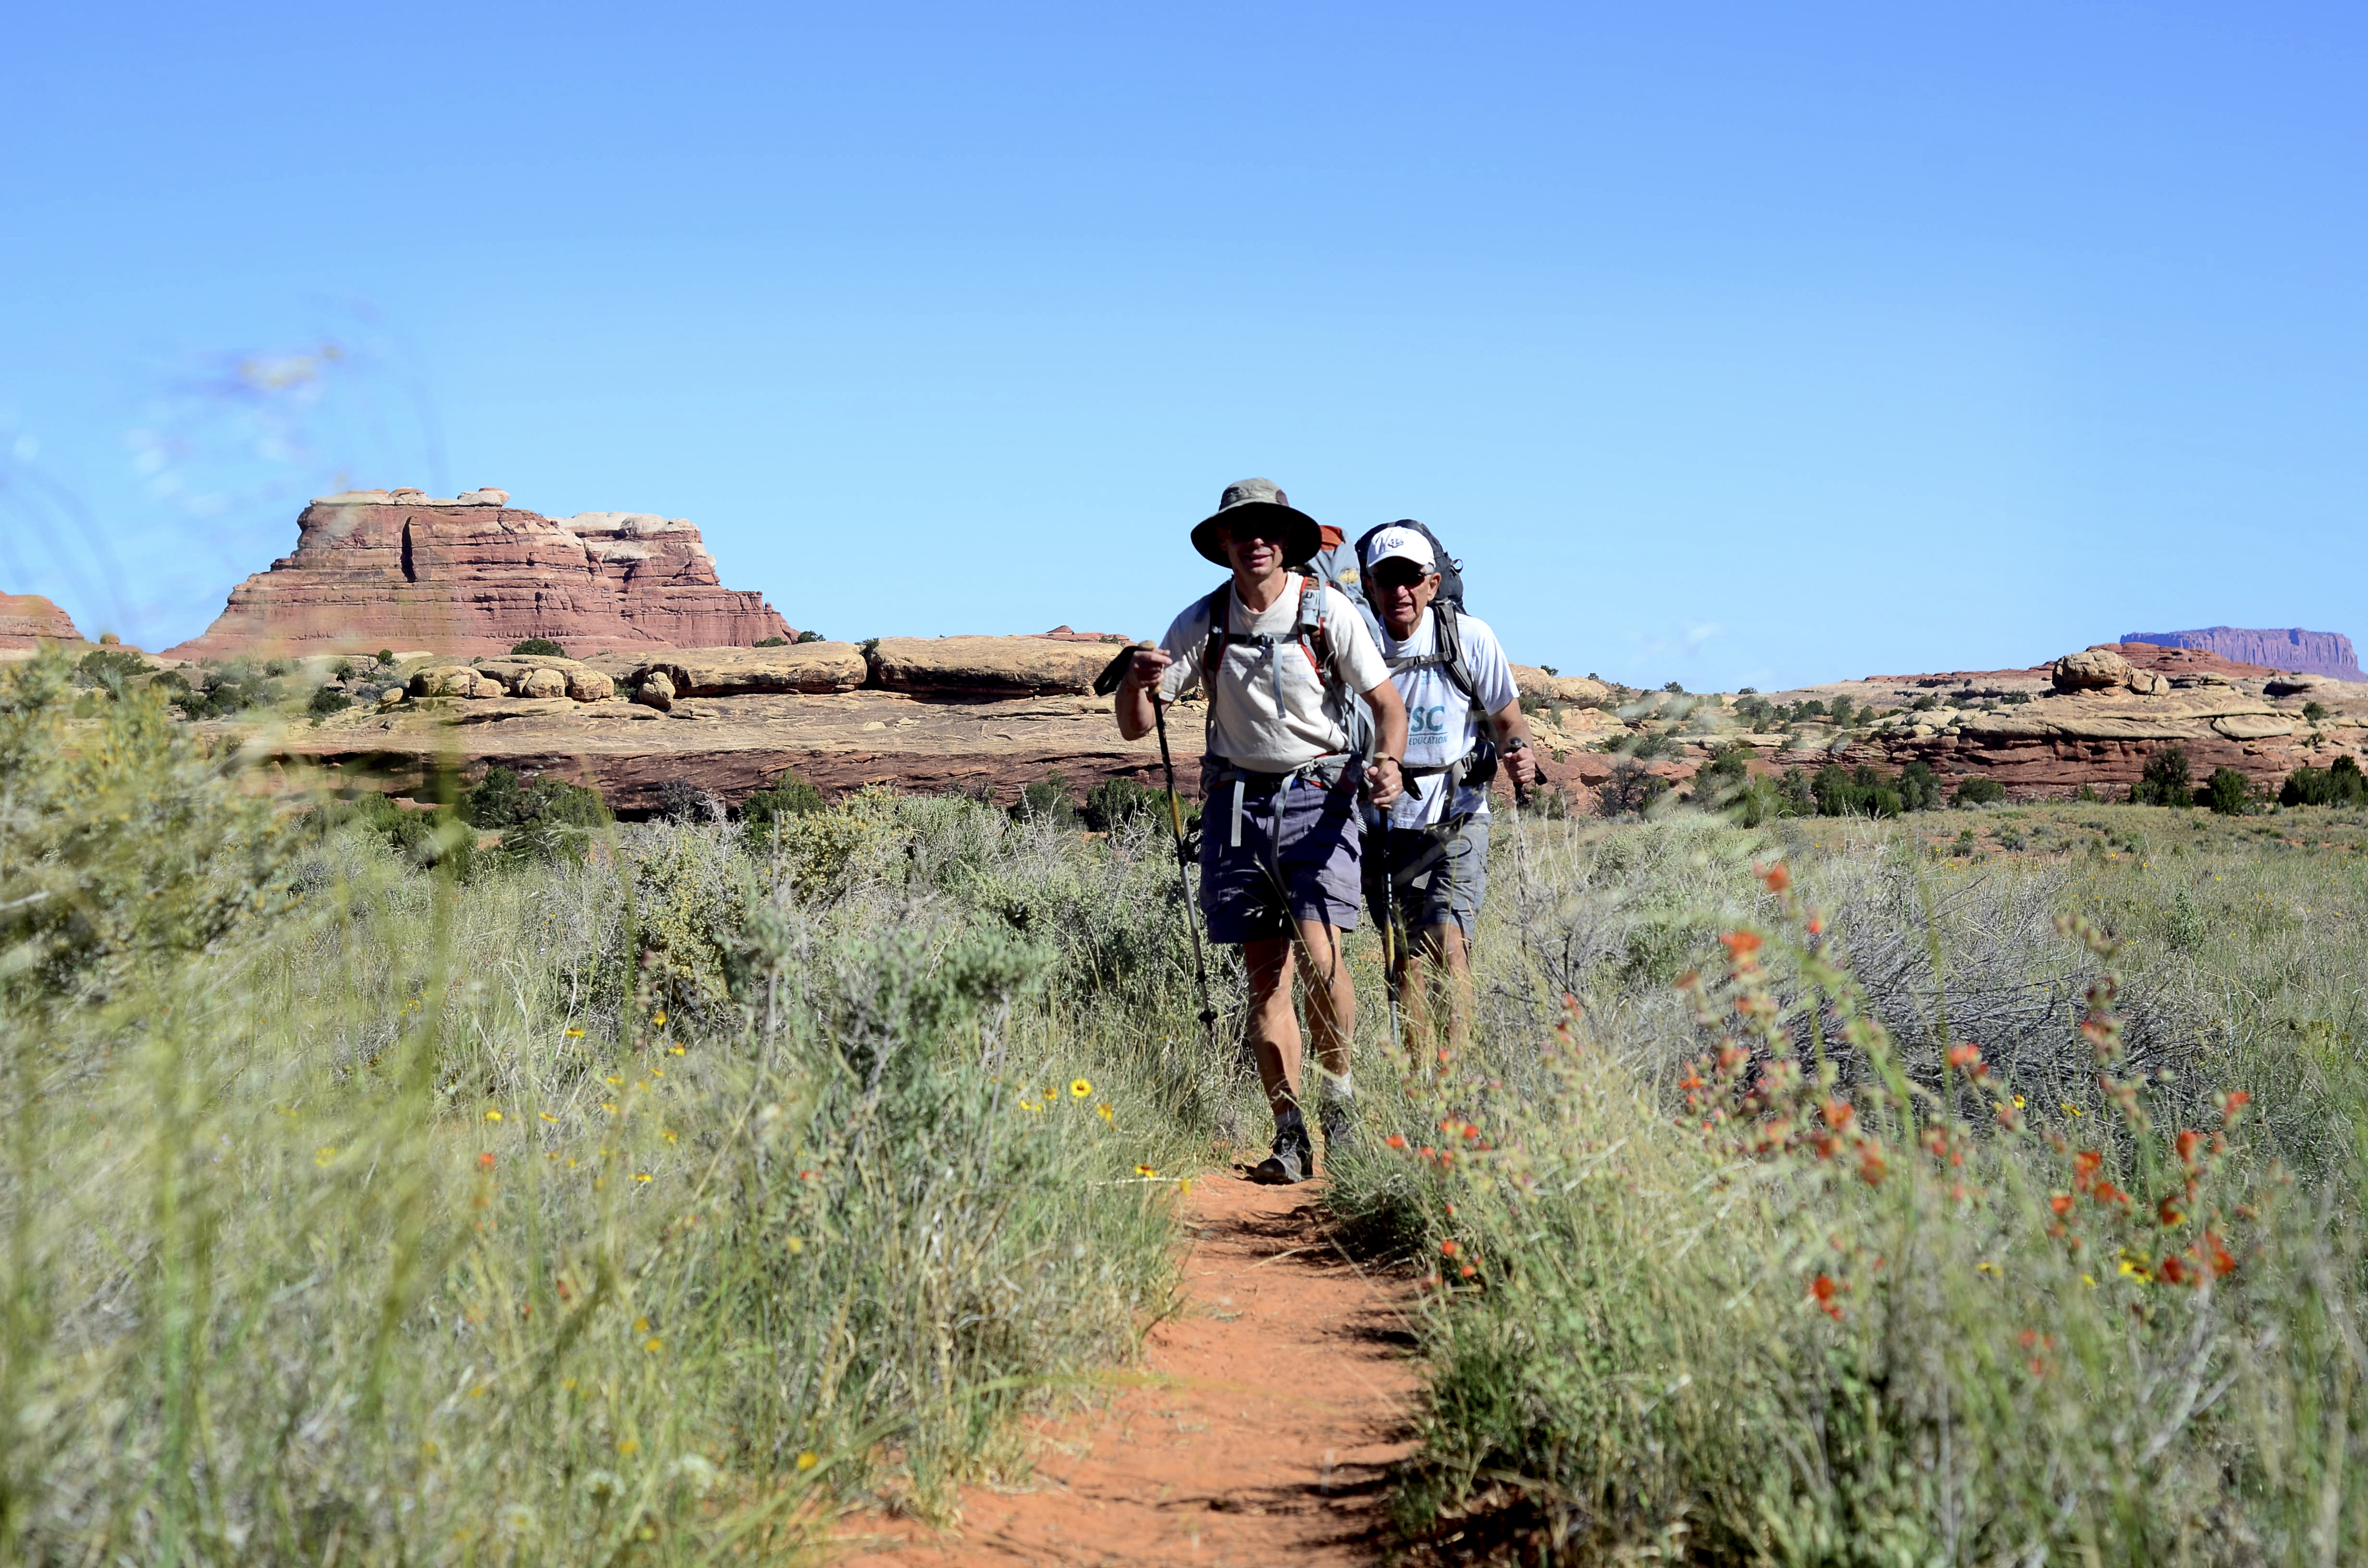 Two backpackers walk on a trail through wildflowers in the Needles. Sandstone formations are visible in the background.